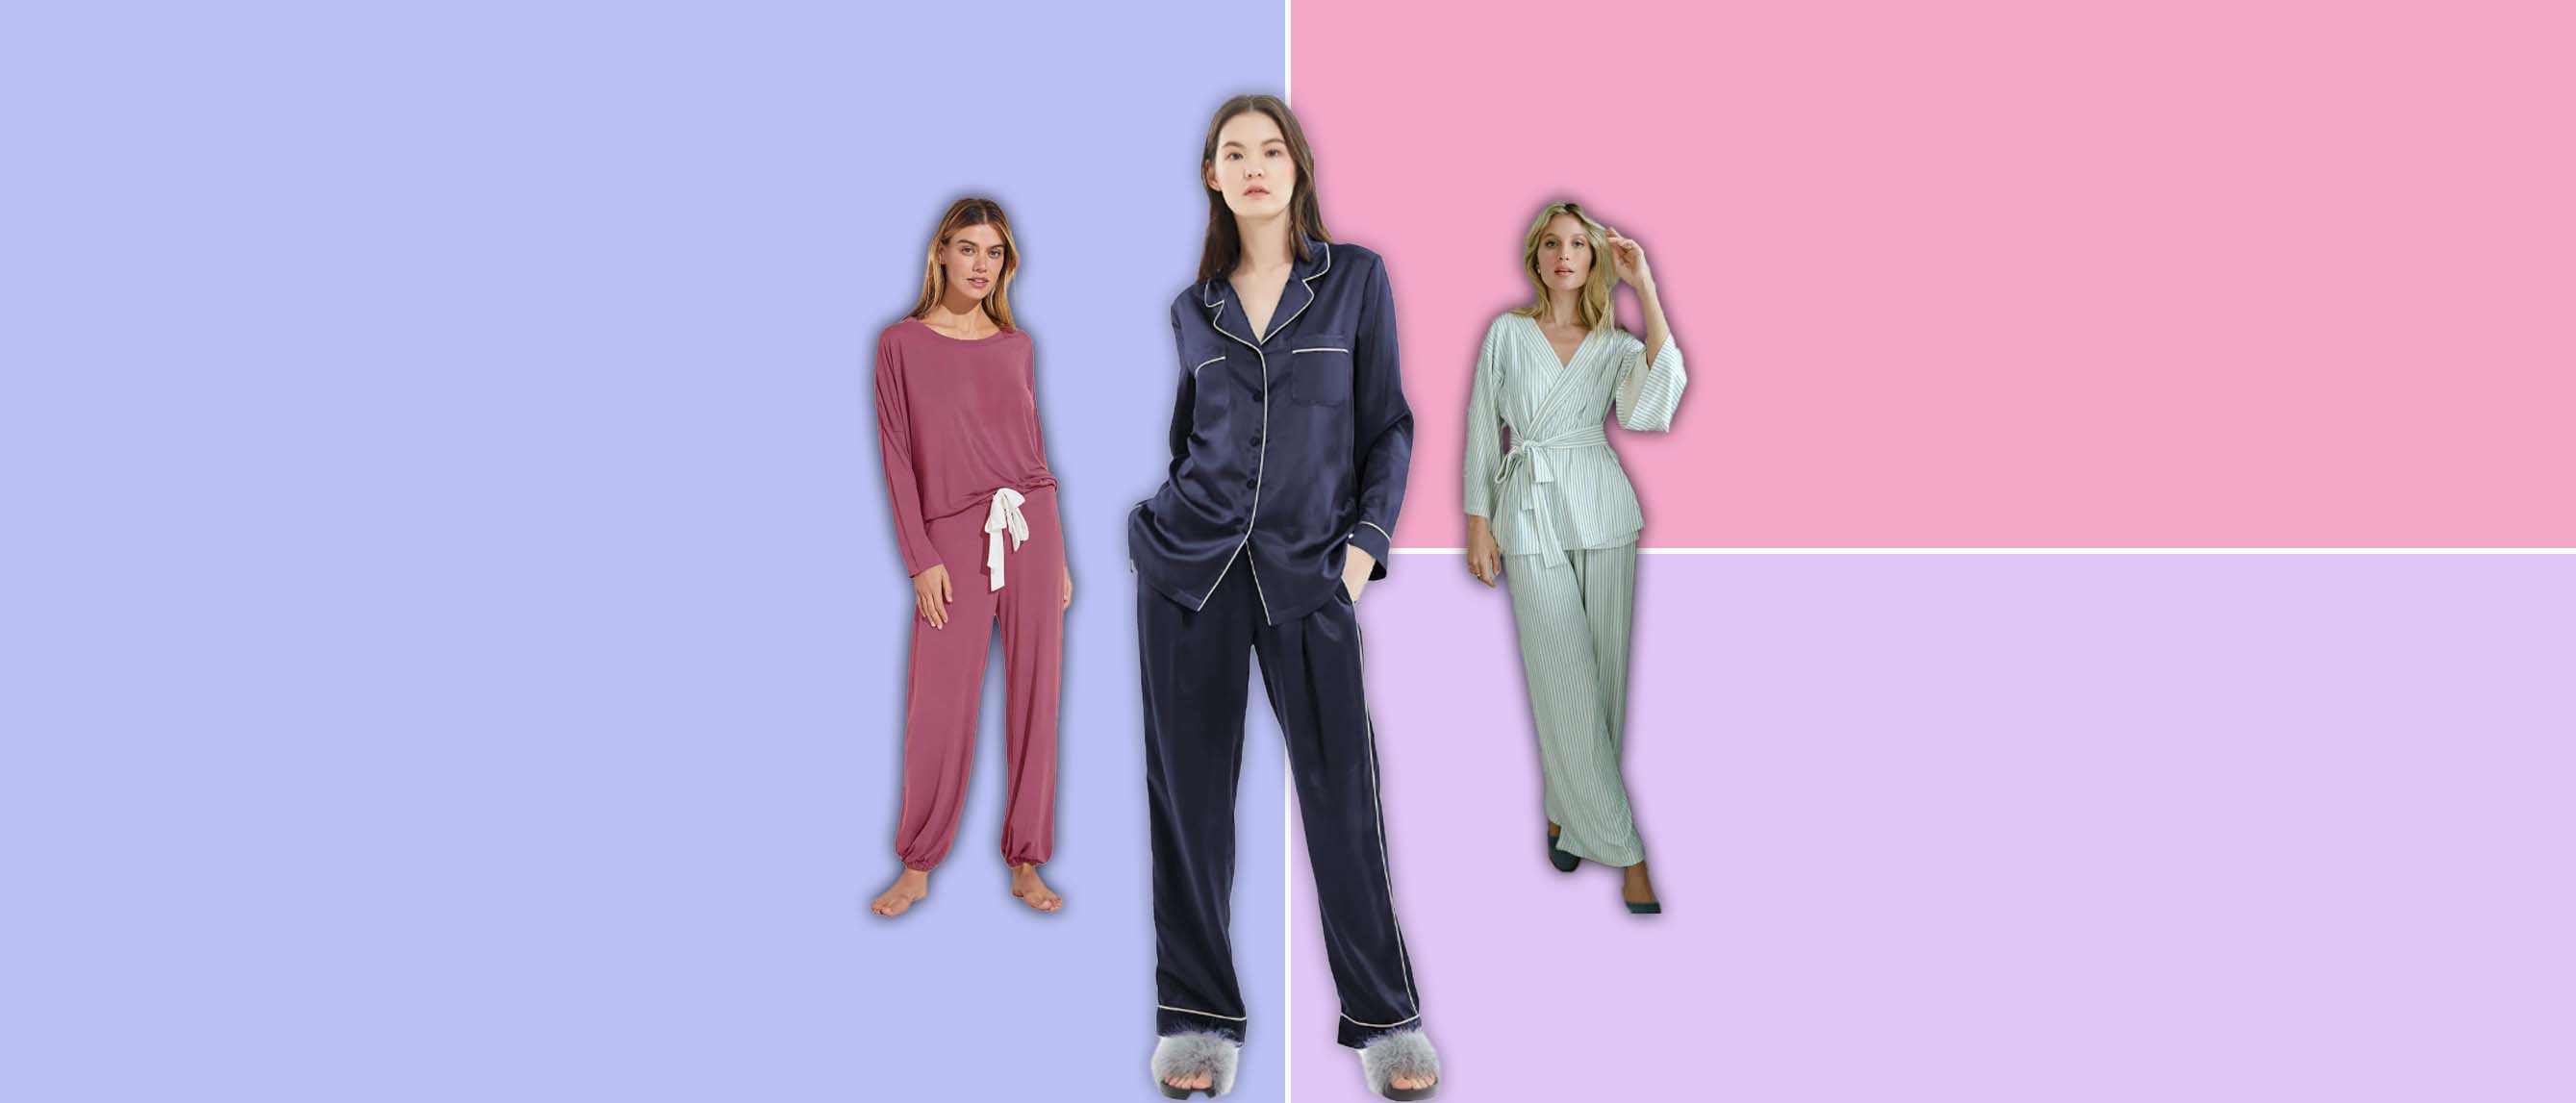 Collage of 3 models wearing pajamas against a pastel purple and pink background